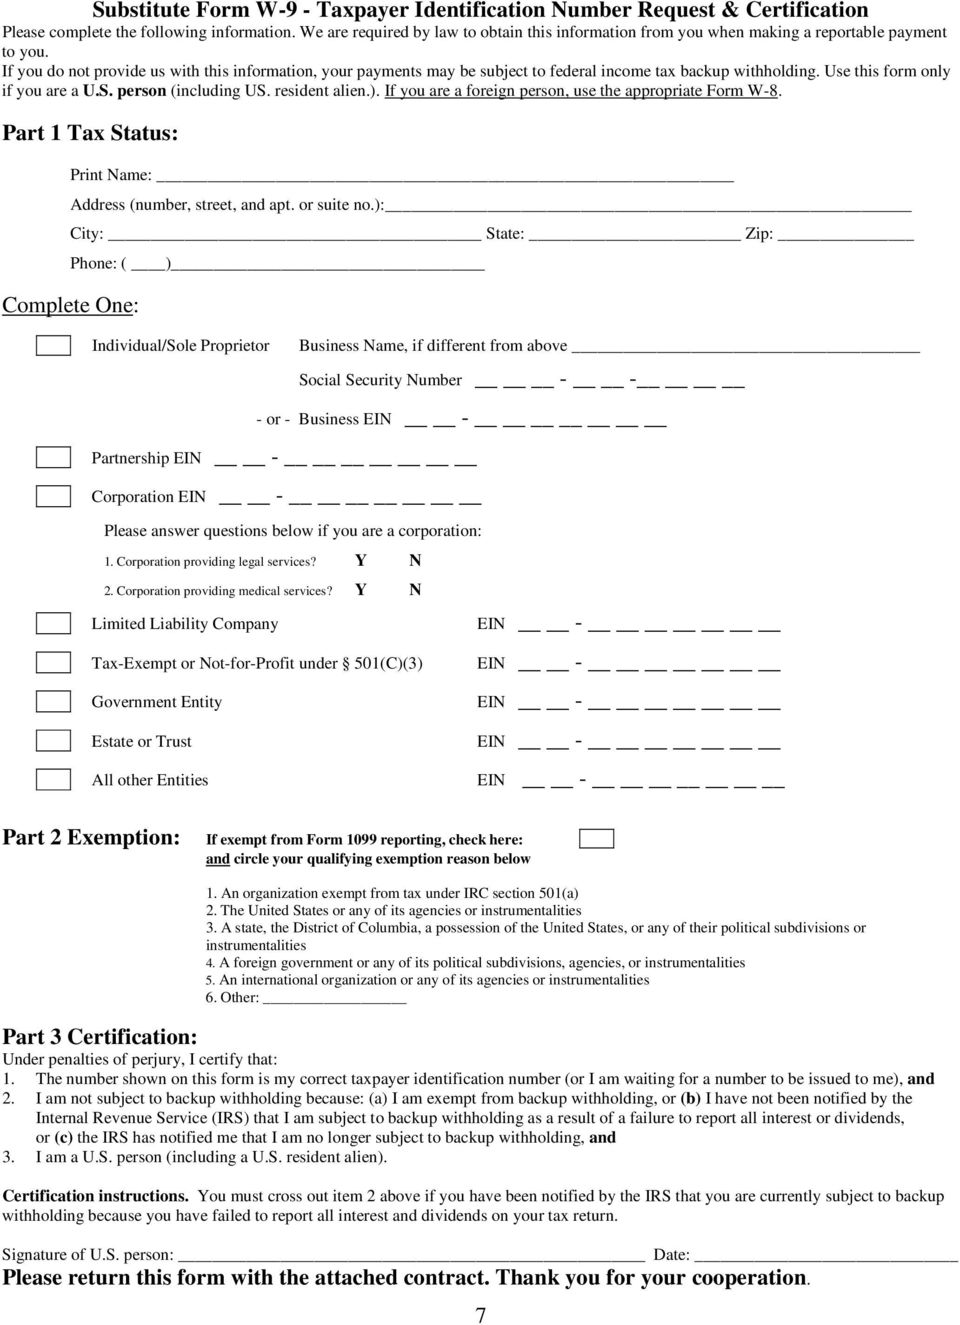 If you do not provide us with this information, your payments may be subject to federal income tax backup withholding. Use this form only if you are a U.S. person (including US. resident alien.).